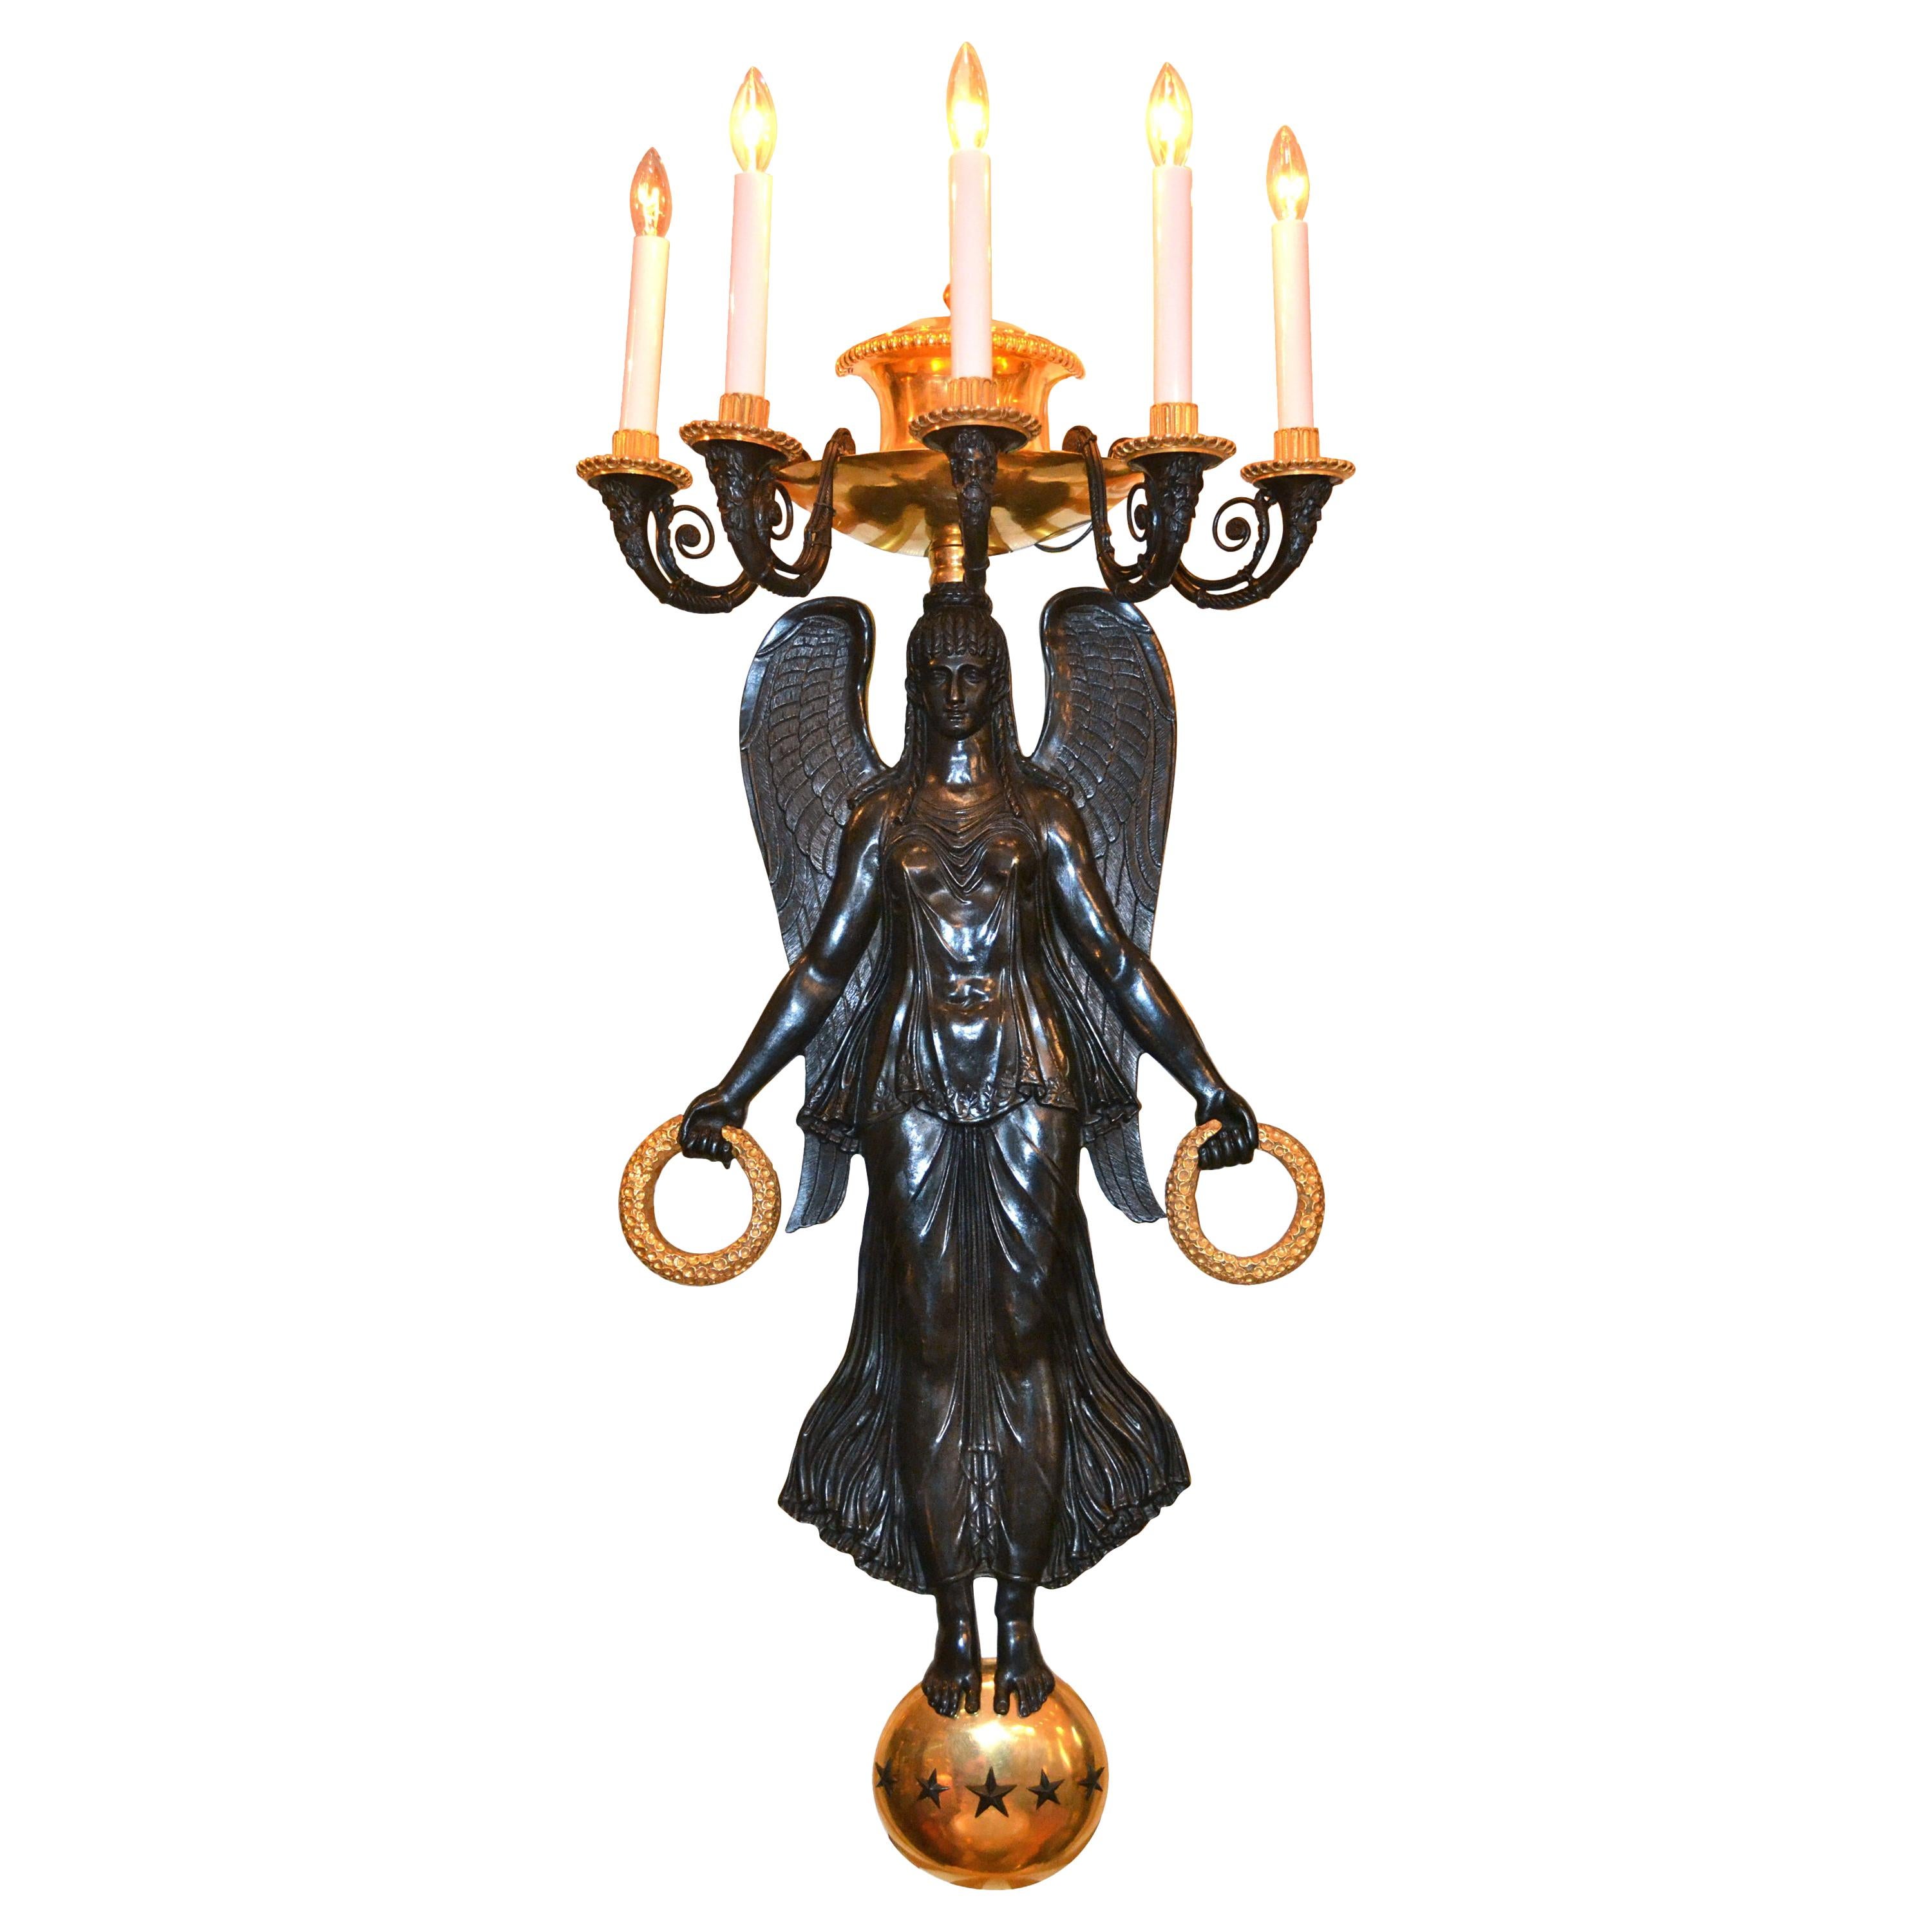 A very large and dramatic pair of French Empire style wall sconces in finely chased patinated and gilded bronze. A large winged Victory in high relief stands on a gilded globe studded with stars. She holds a gilded wreath in each outstretched hand,